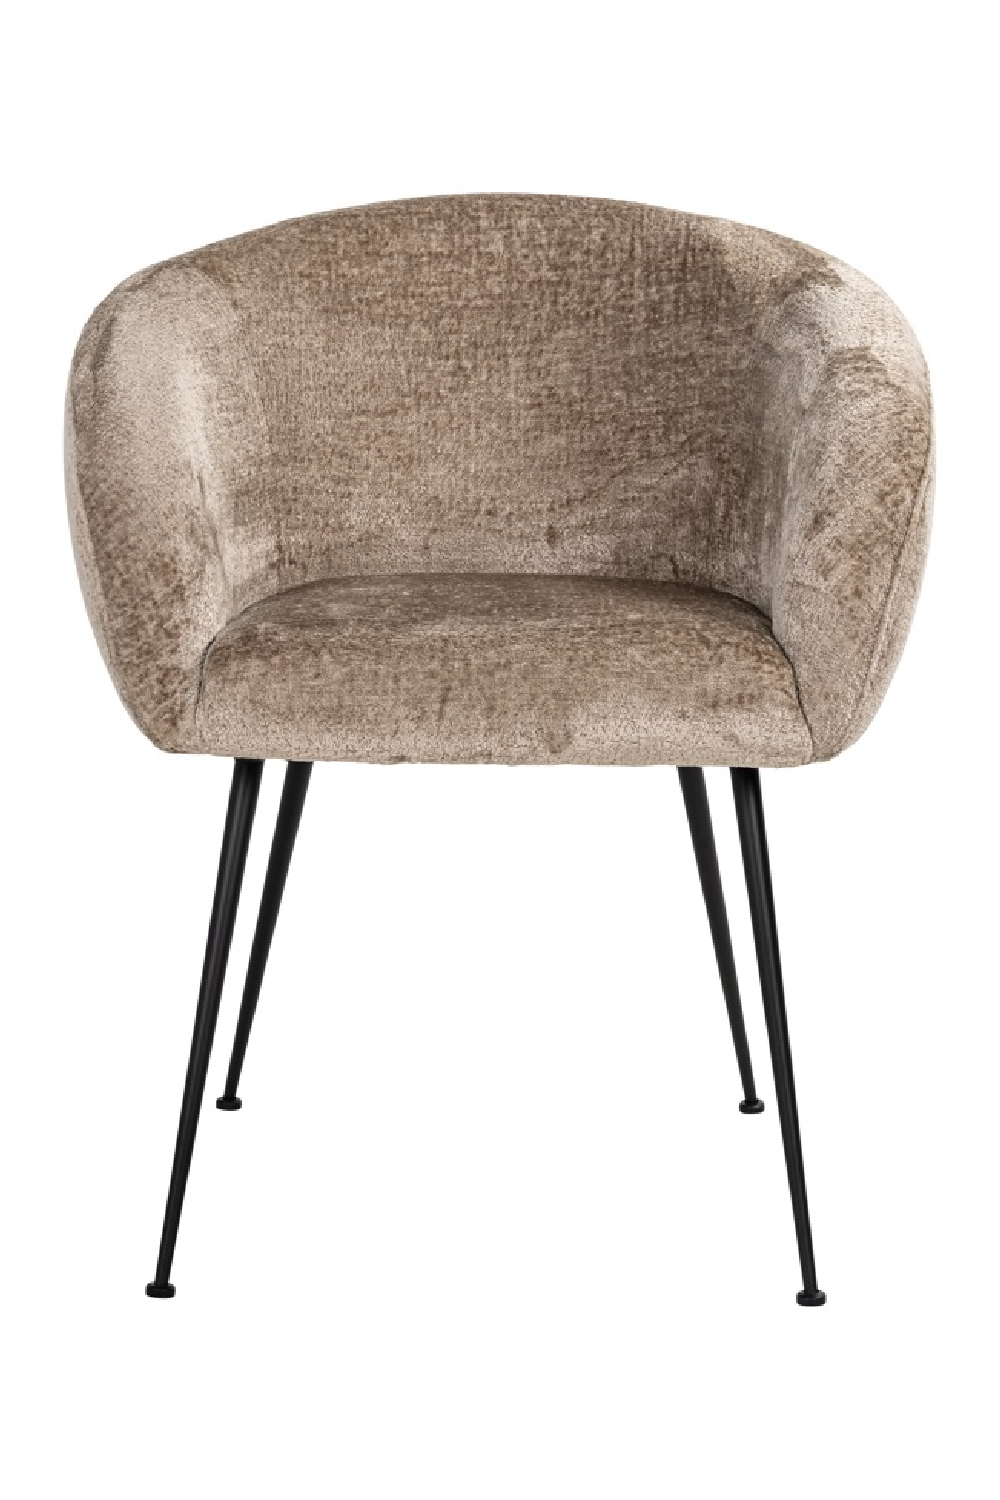 Curved Modern Dining Chair | OROA Ruby | Oroa.com